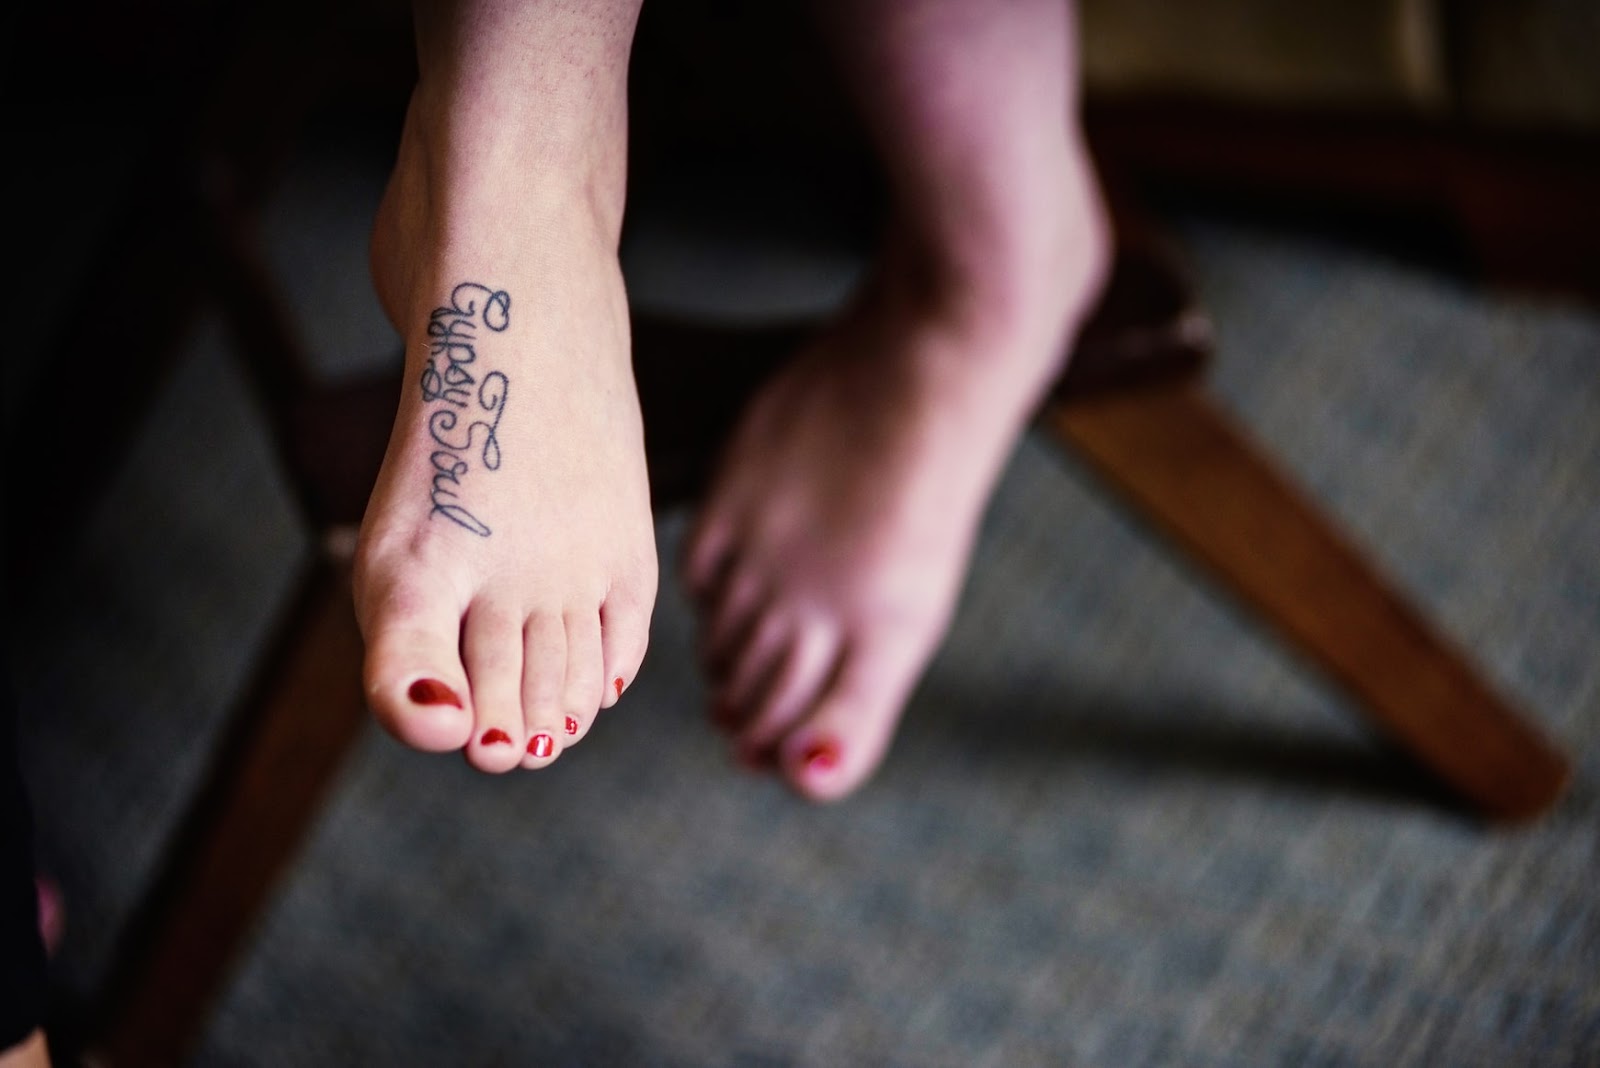 Top 20 Girly Foot Tattoo Ideas For Self-Expression - InkMatch